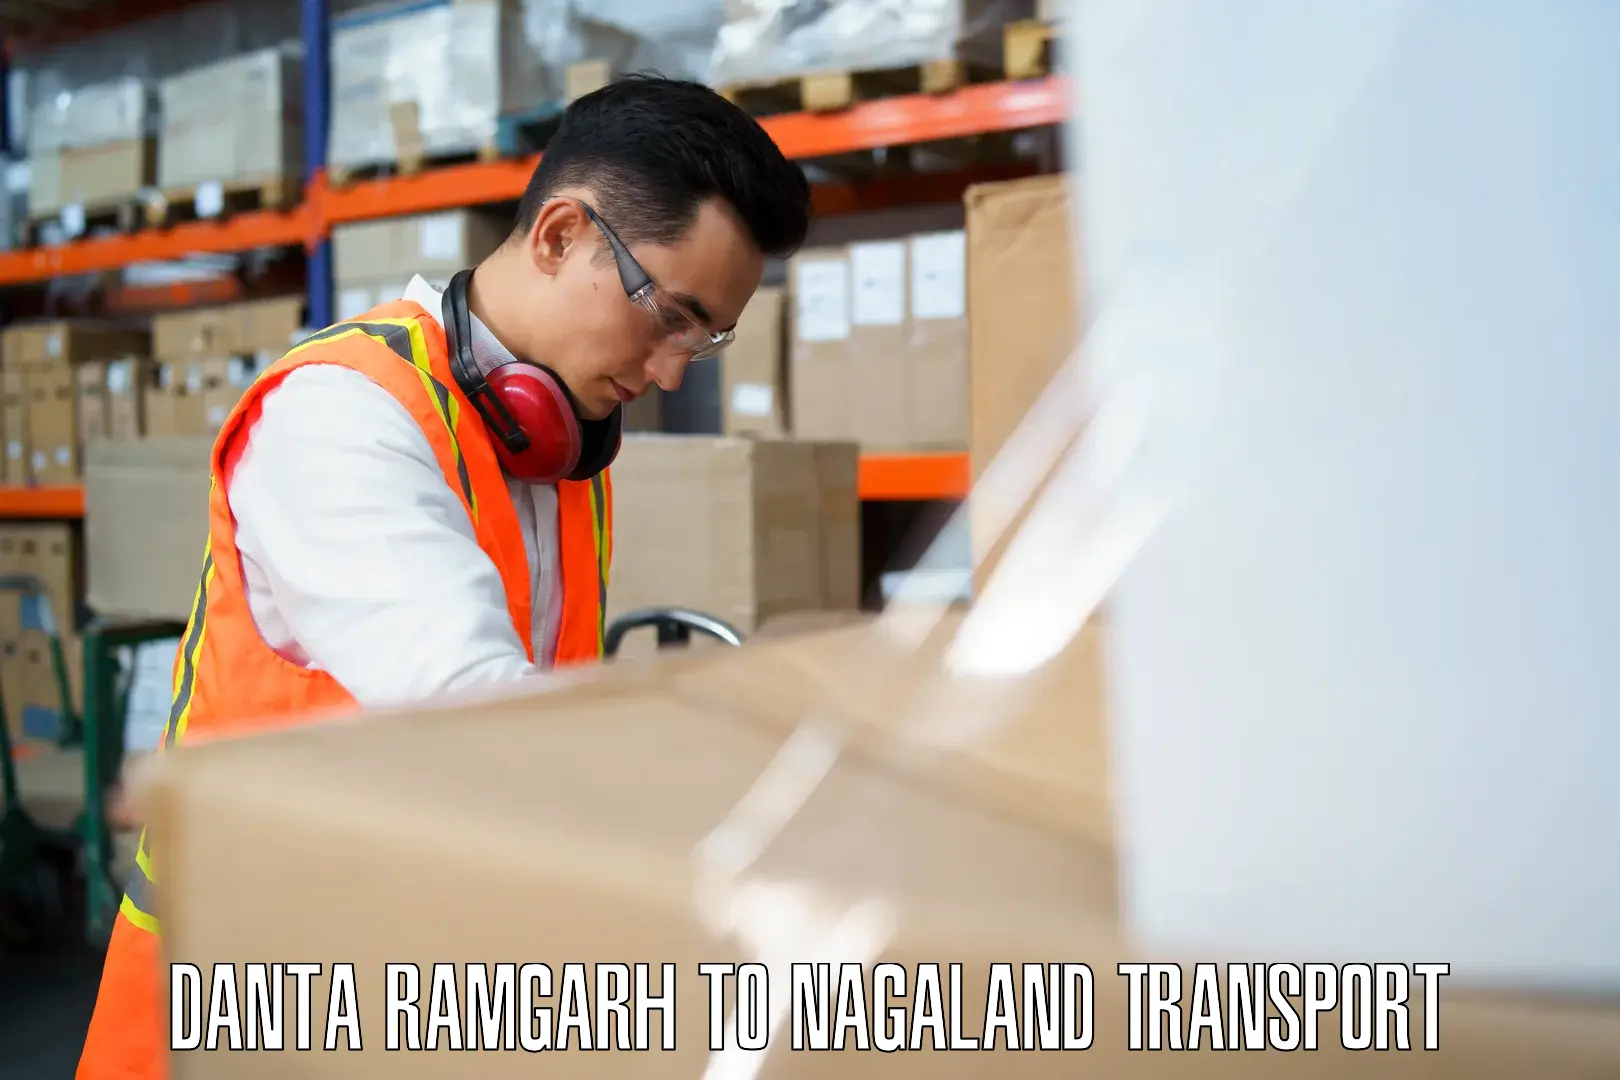 Container transport service Danta Ramgarh to Longleng